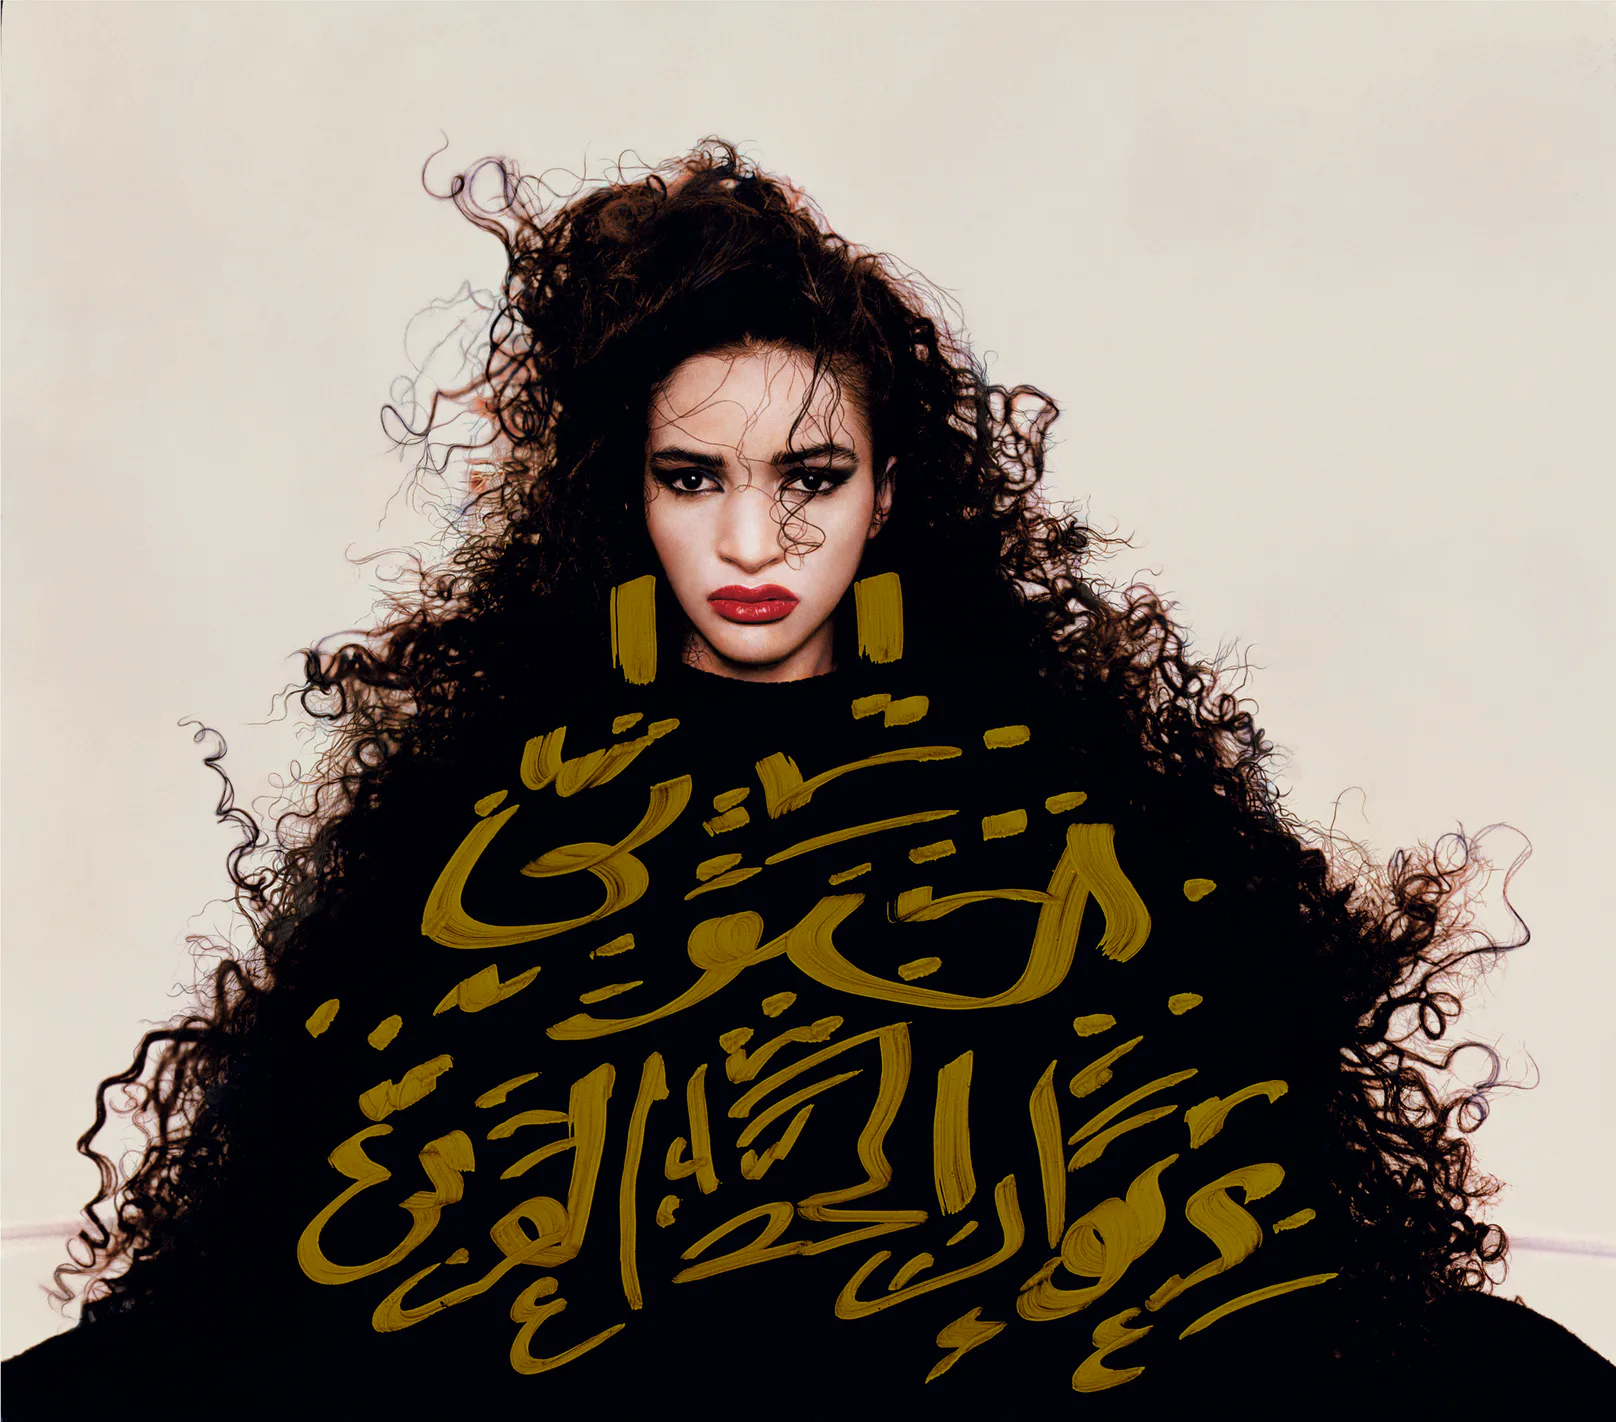 Portrait of model Farida, with handwritten Arabic calligraphy written on top of the image